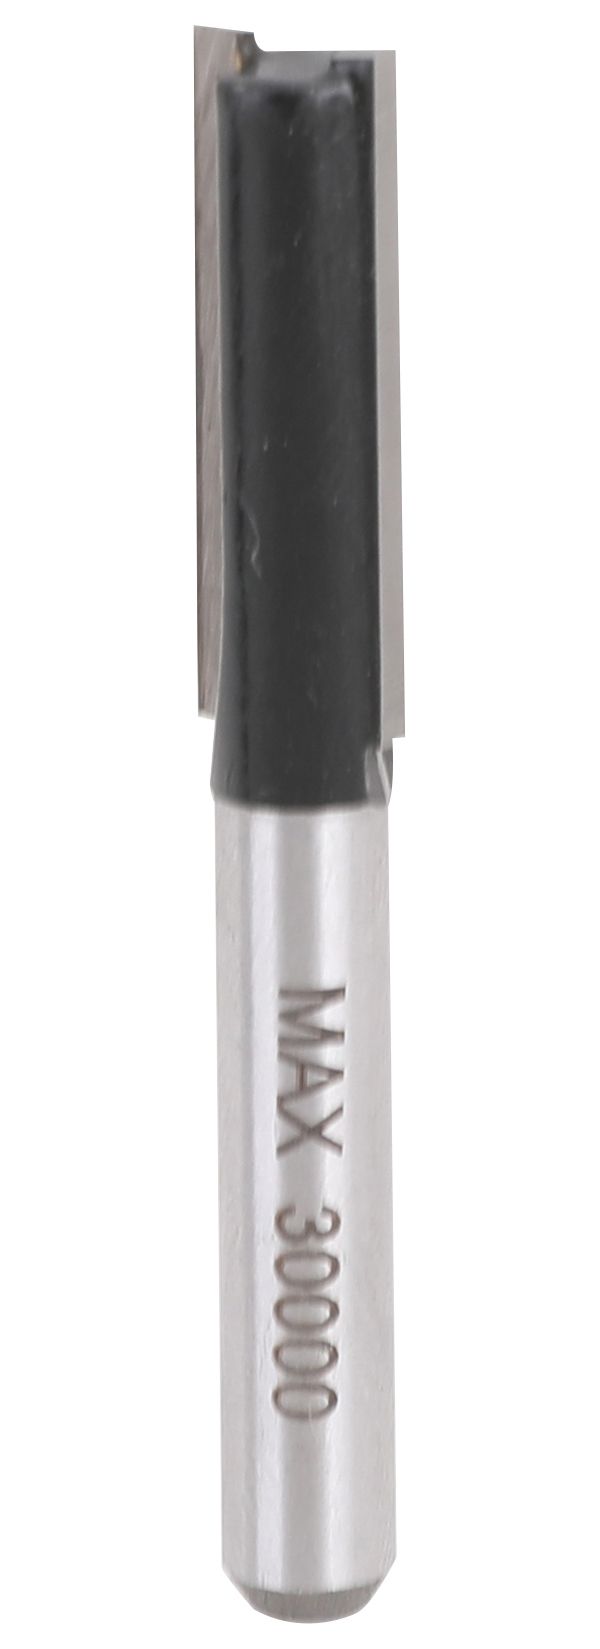 Image of Wickes Straight Router Bit 1/4in - 8mm